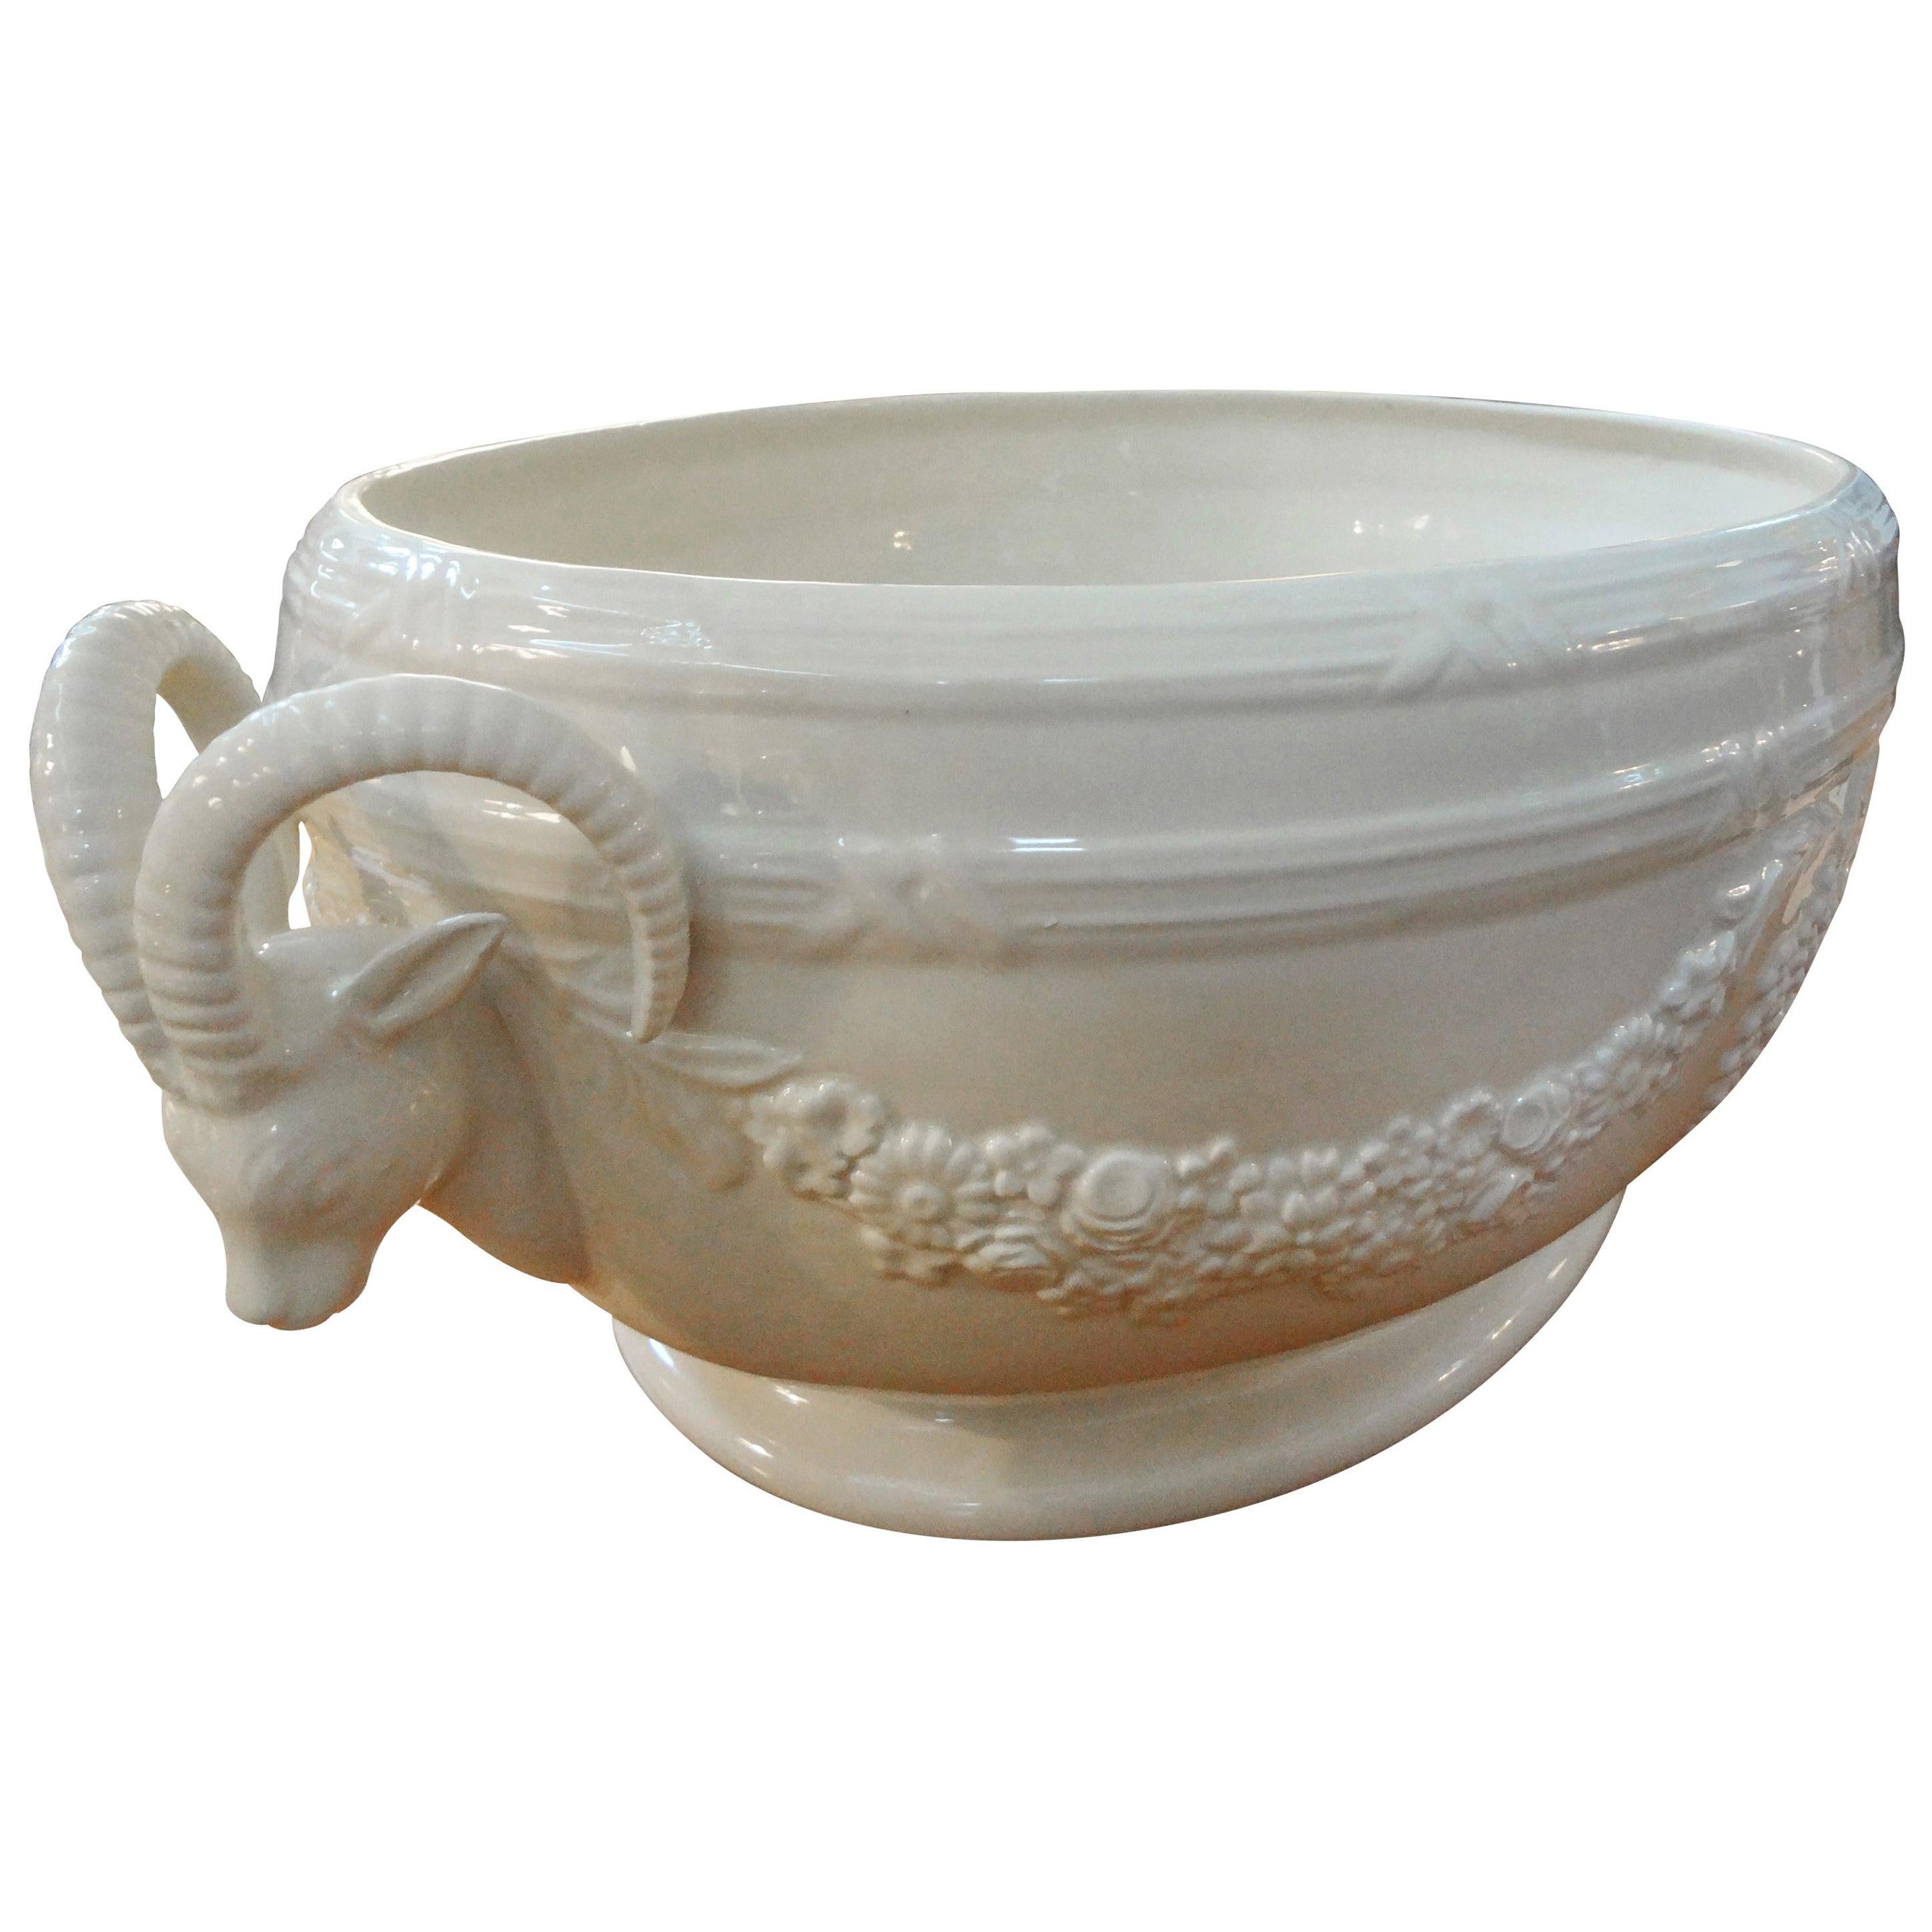 Stunning Italian
Neoclassical style white creamware or glazed pottery planter, jardinière or cachepot. This lovely Italian jardinière has ram's heads on either side and is deep enough to accommodate two 6